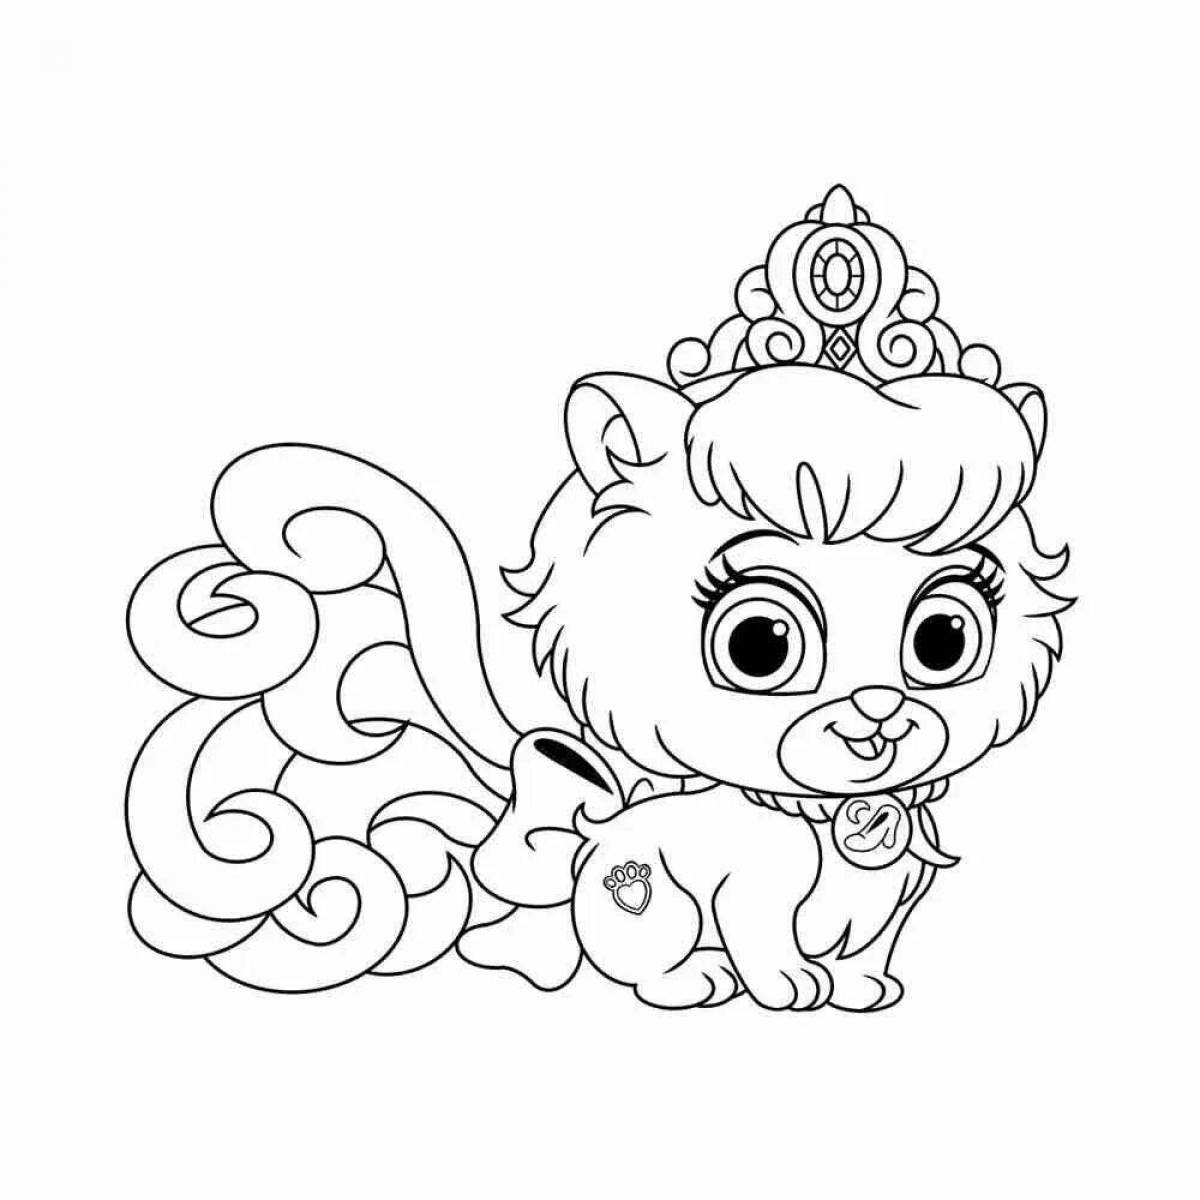 Gorgeous animal princess coloring book for girls